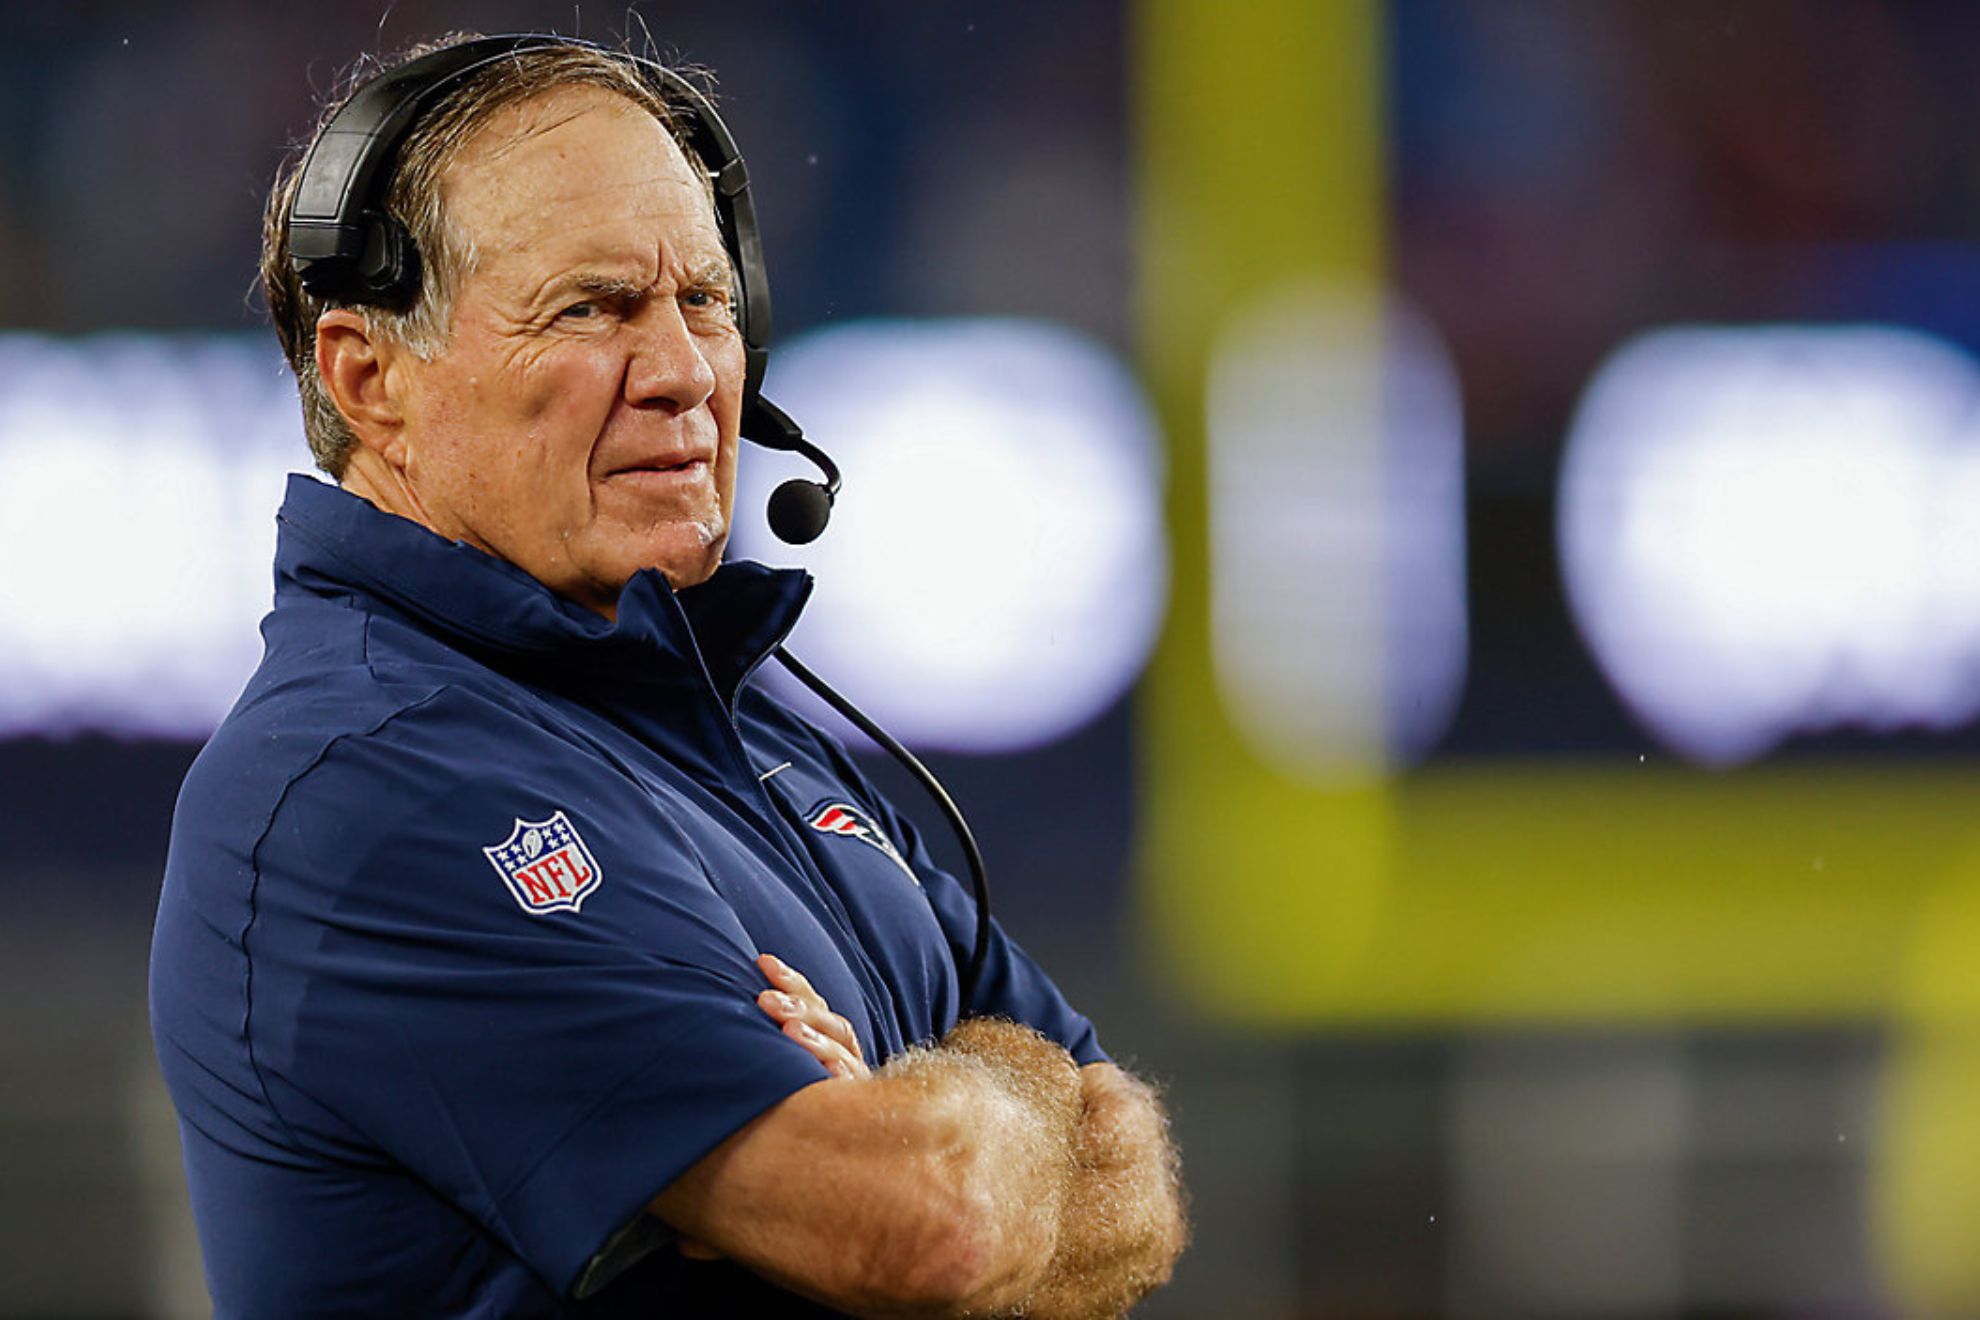 Bill Belichick isn't going anywhere, no matter how bad things get for the Patriots